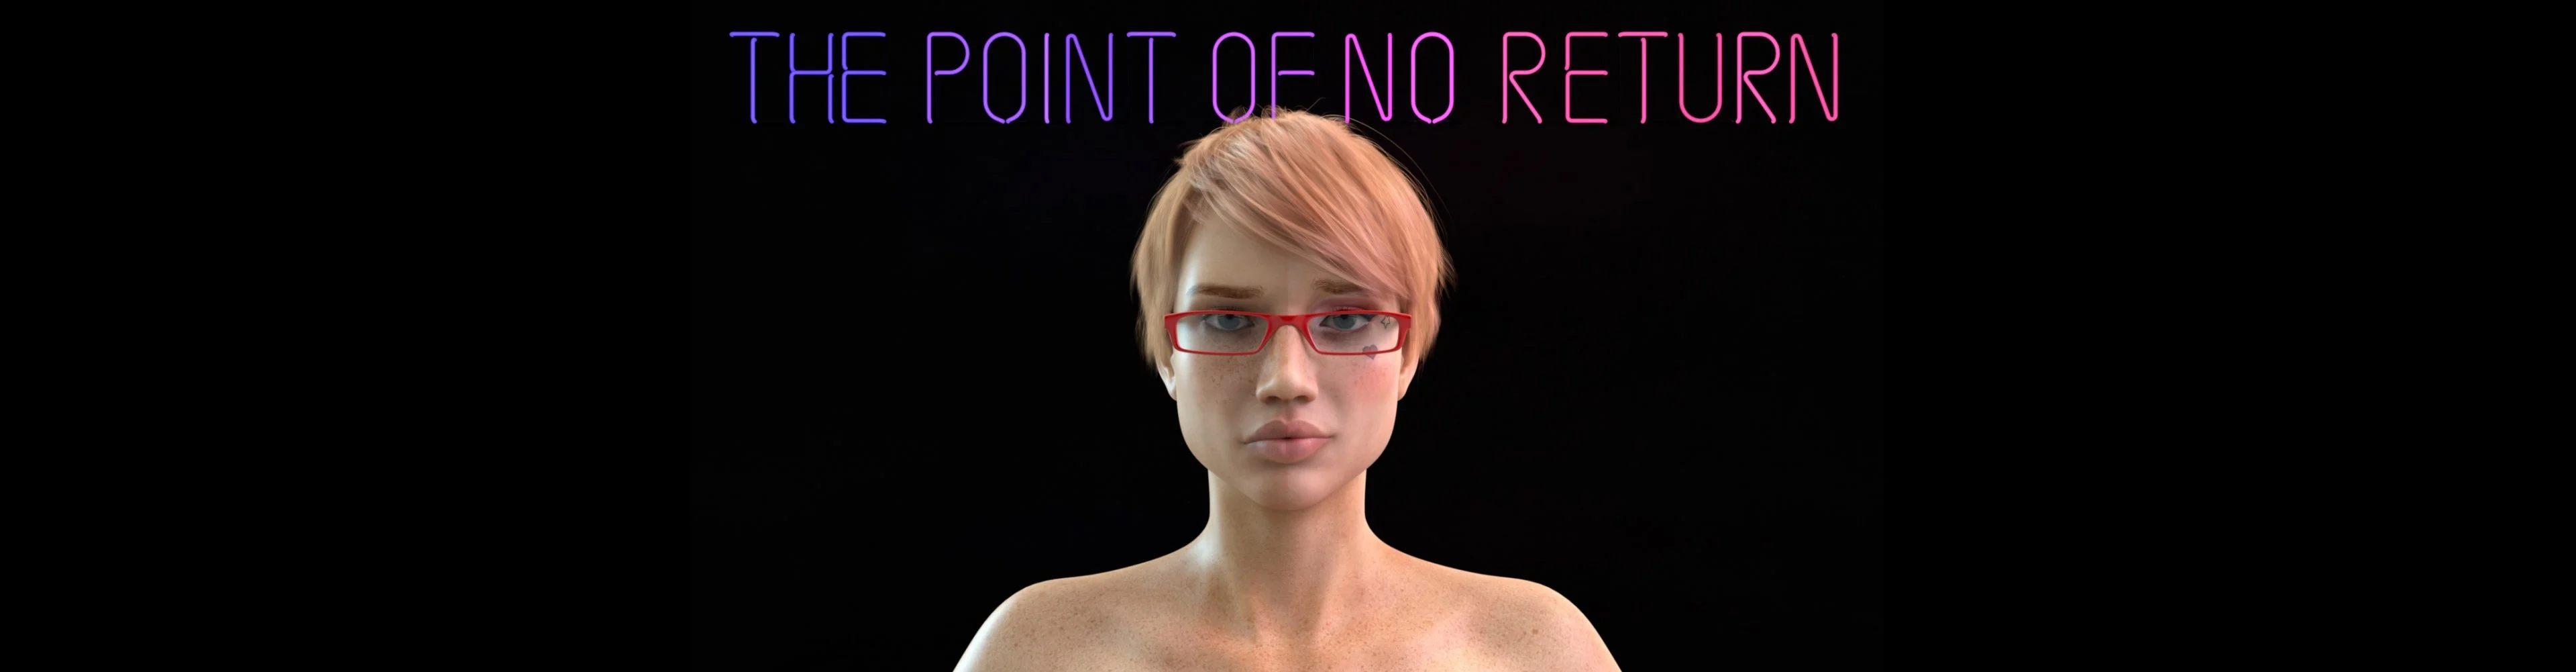 The Point of No Return header image